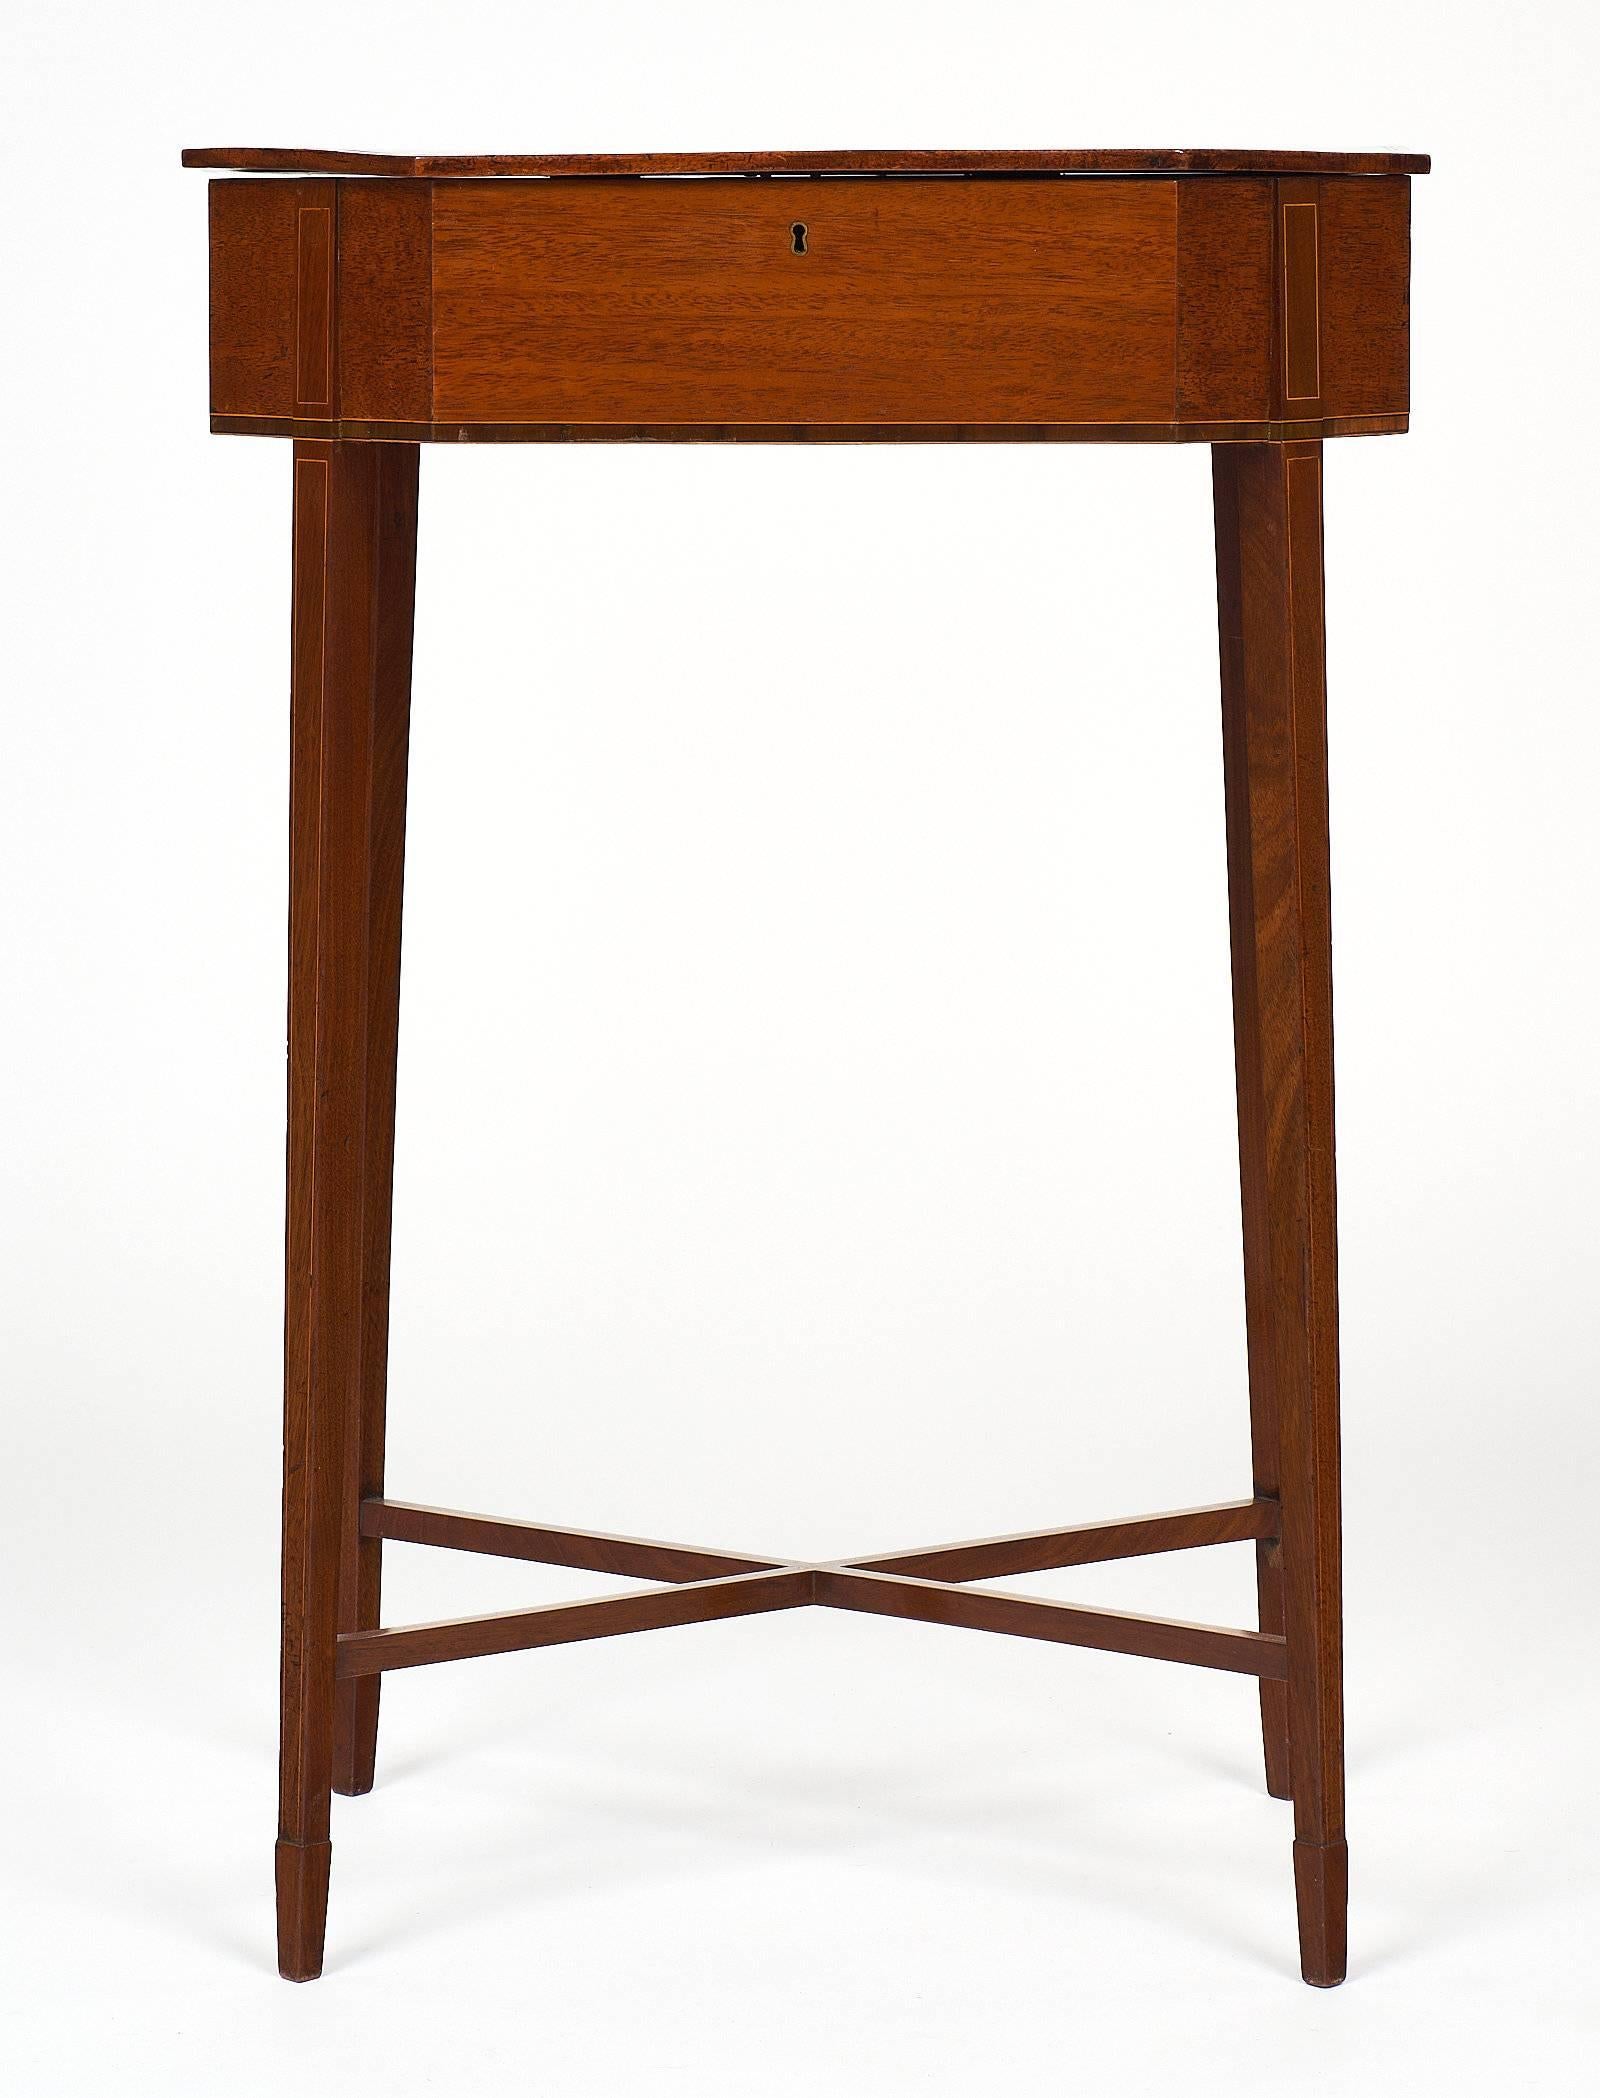 English antique sewing table made of mahogany. This piece has a cross banding border on the rectangular hinge top with clipped corners, and tulip wood stringing on the four square, tapered legs. The legs are supported by an X-stretcher. This piece